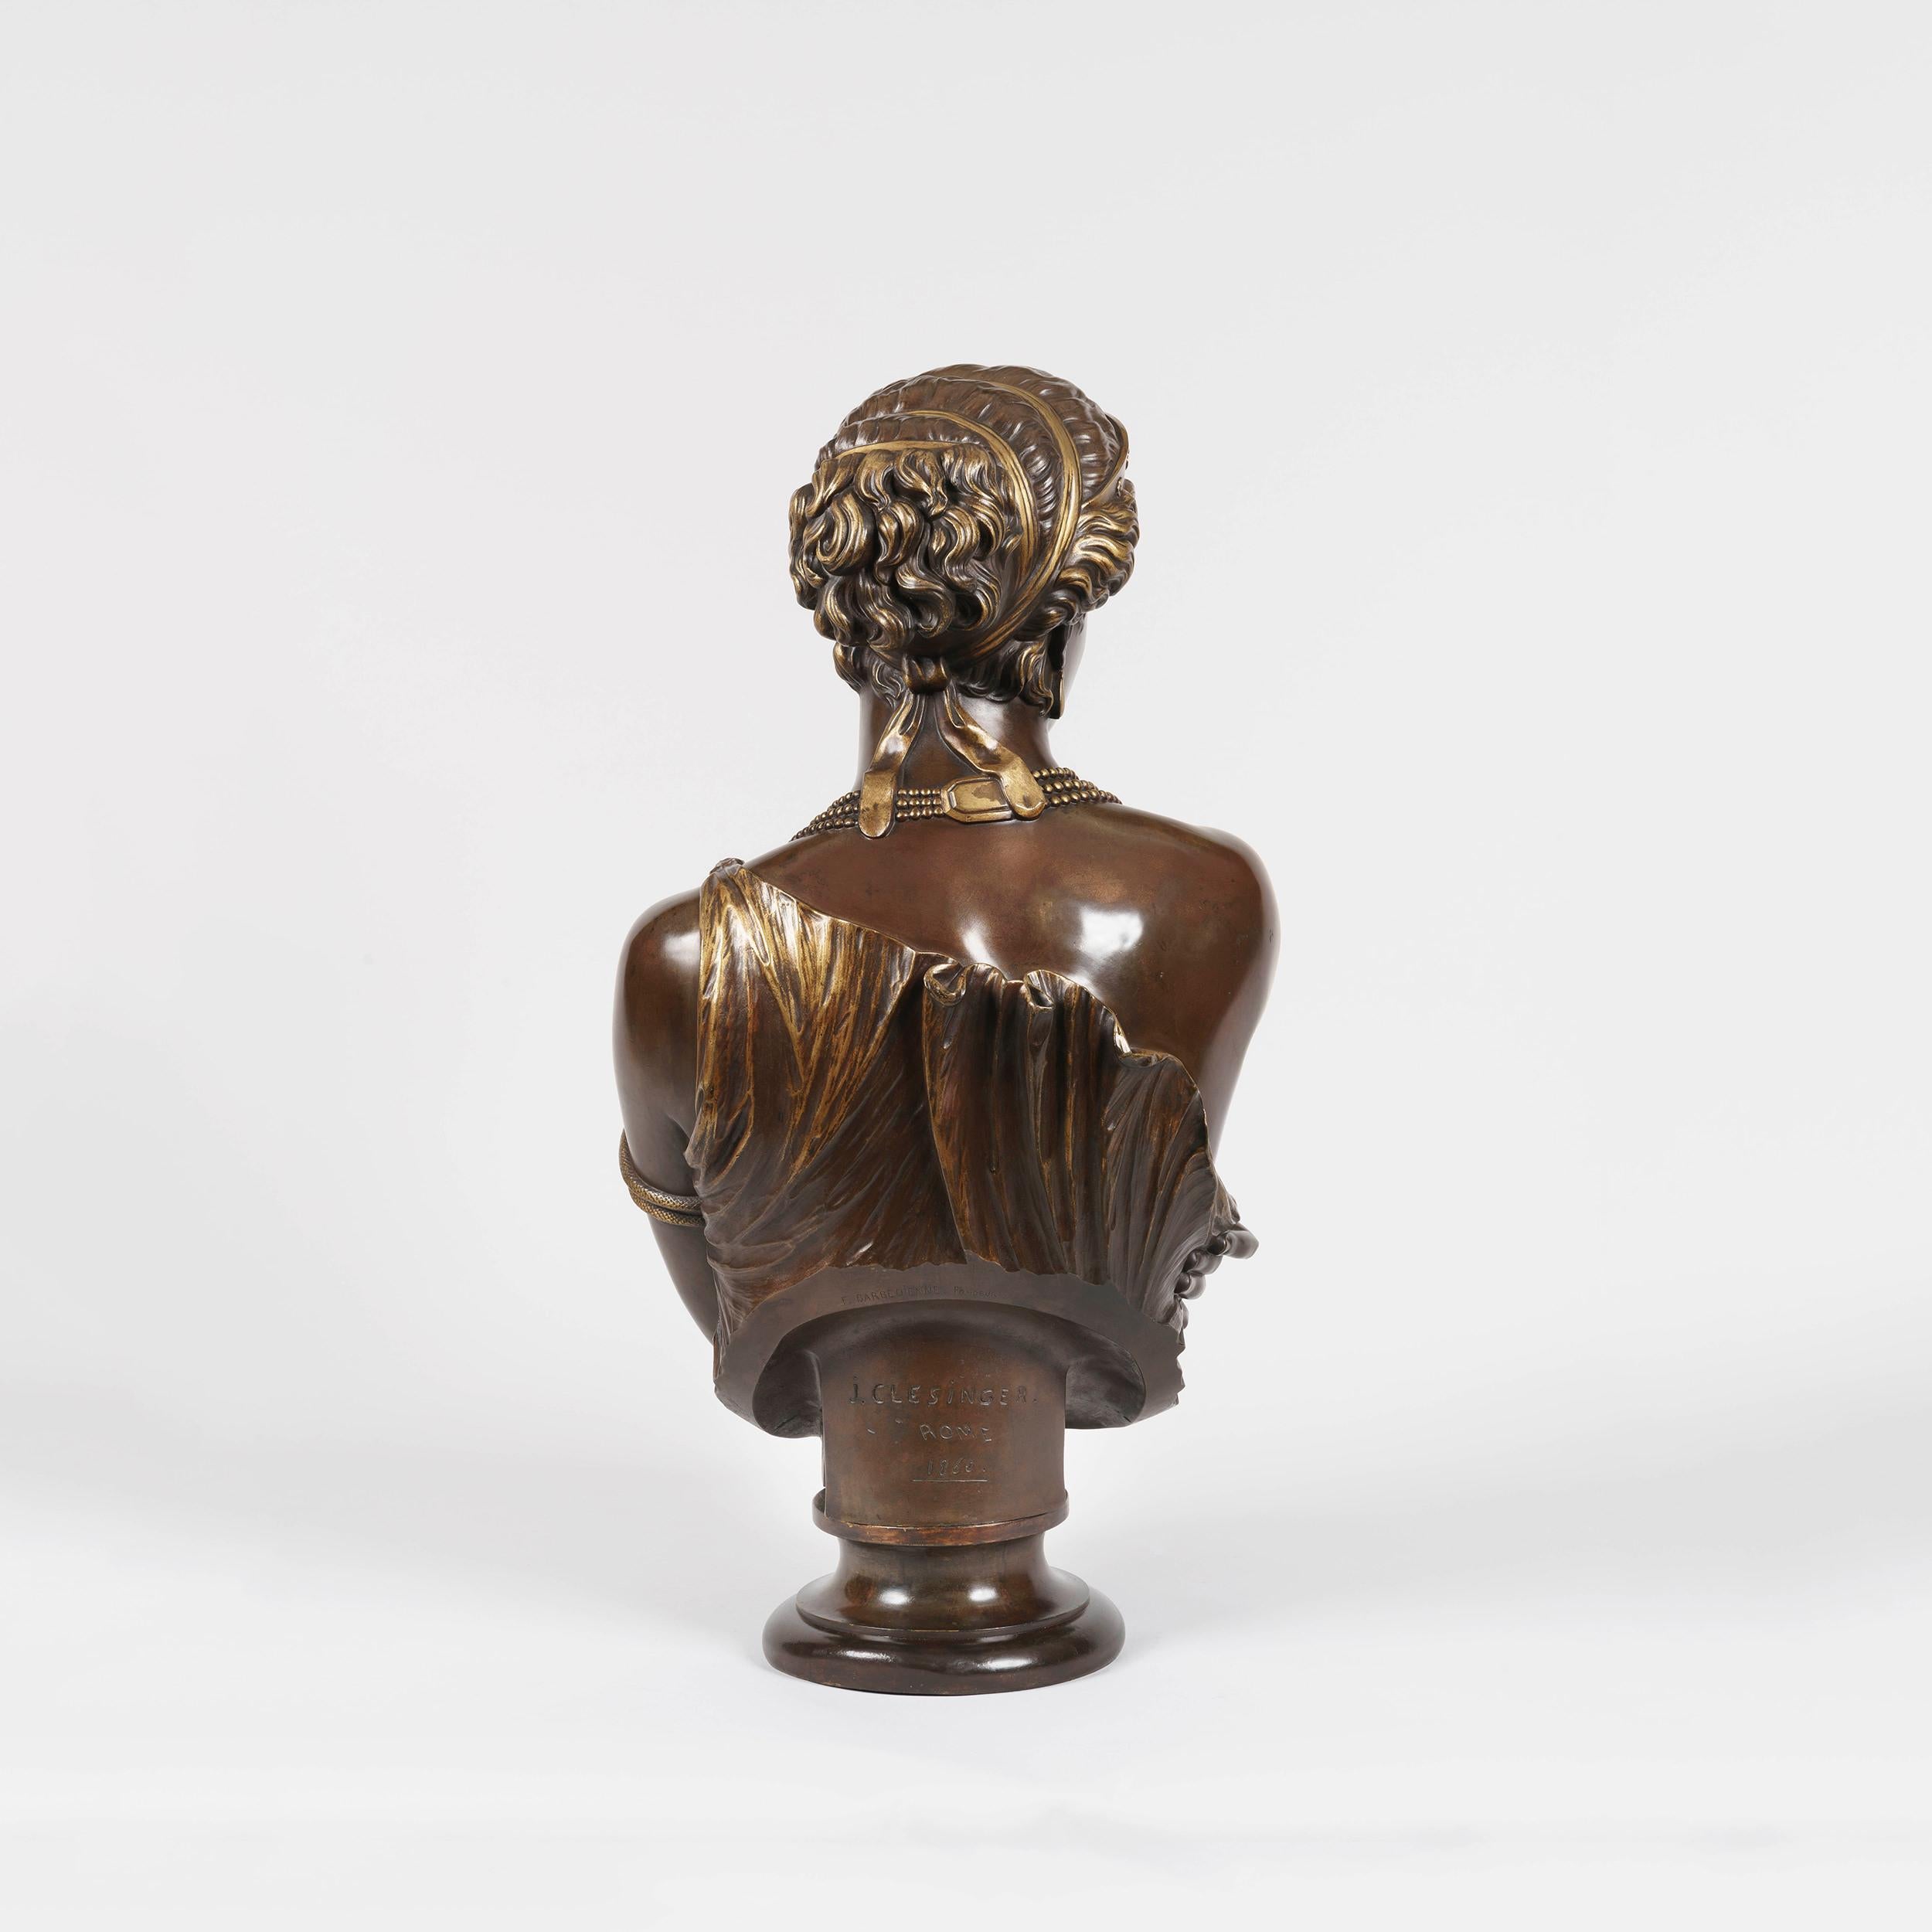 A Bust of 'Helen of Troy'
Sculpted by J-B Clesinger, and cast by the Barbedienne Foundry

Cast in bronze, and having three distinct patinations of natural bronze, brown and gilt. Marked to the base of the bust 'J. Clesinger Rome 1860' and the